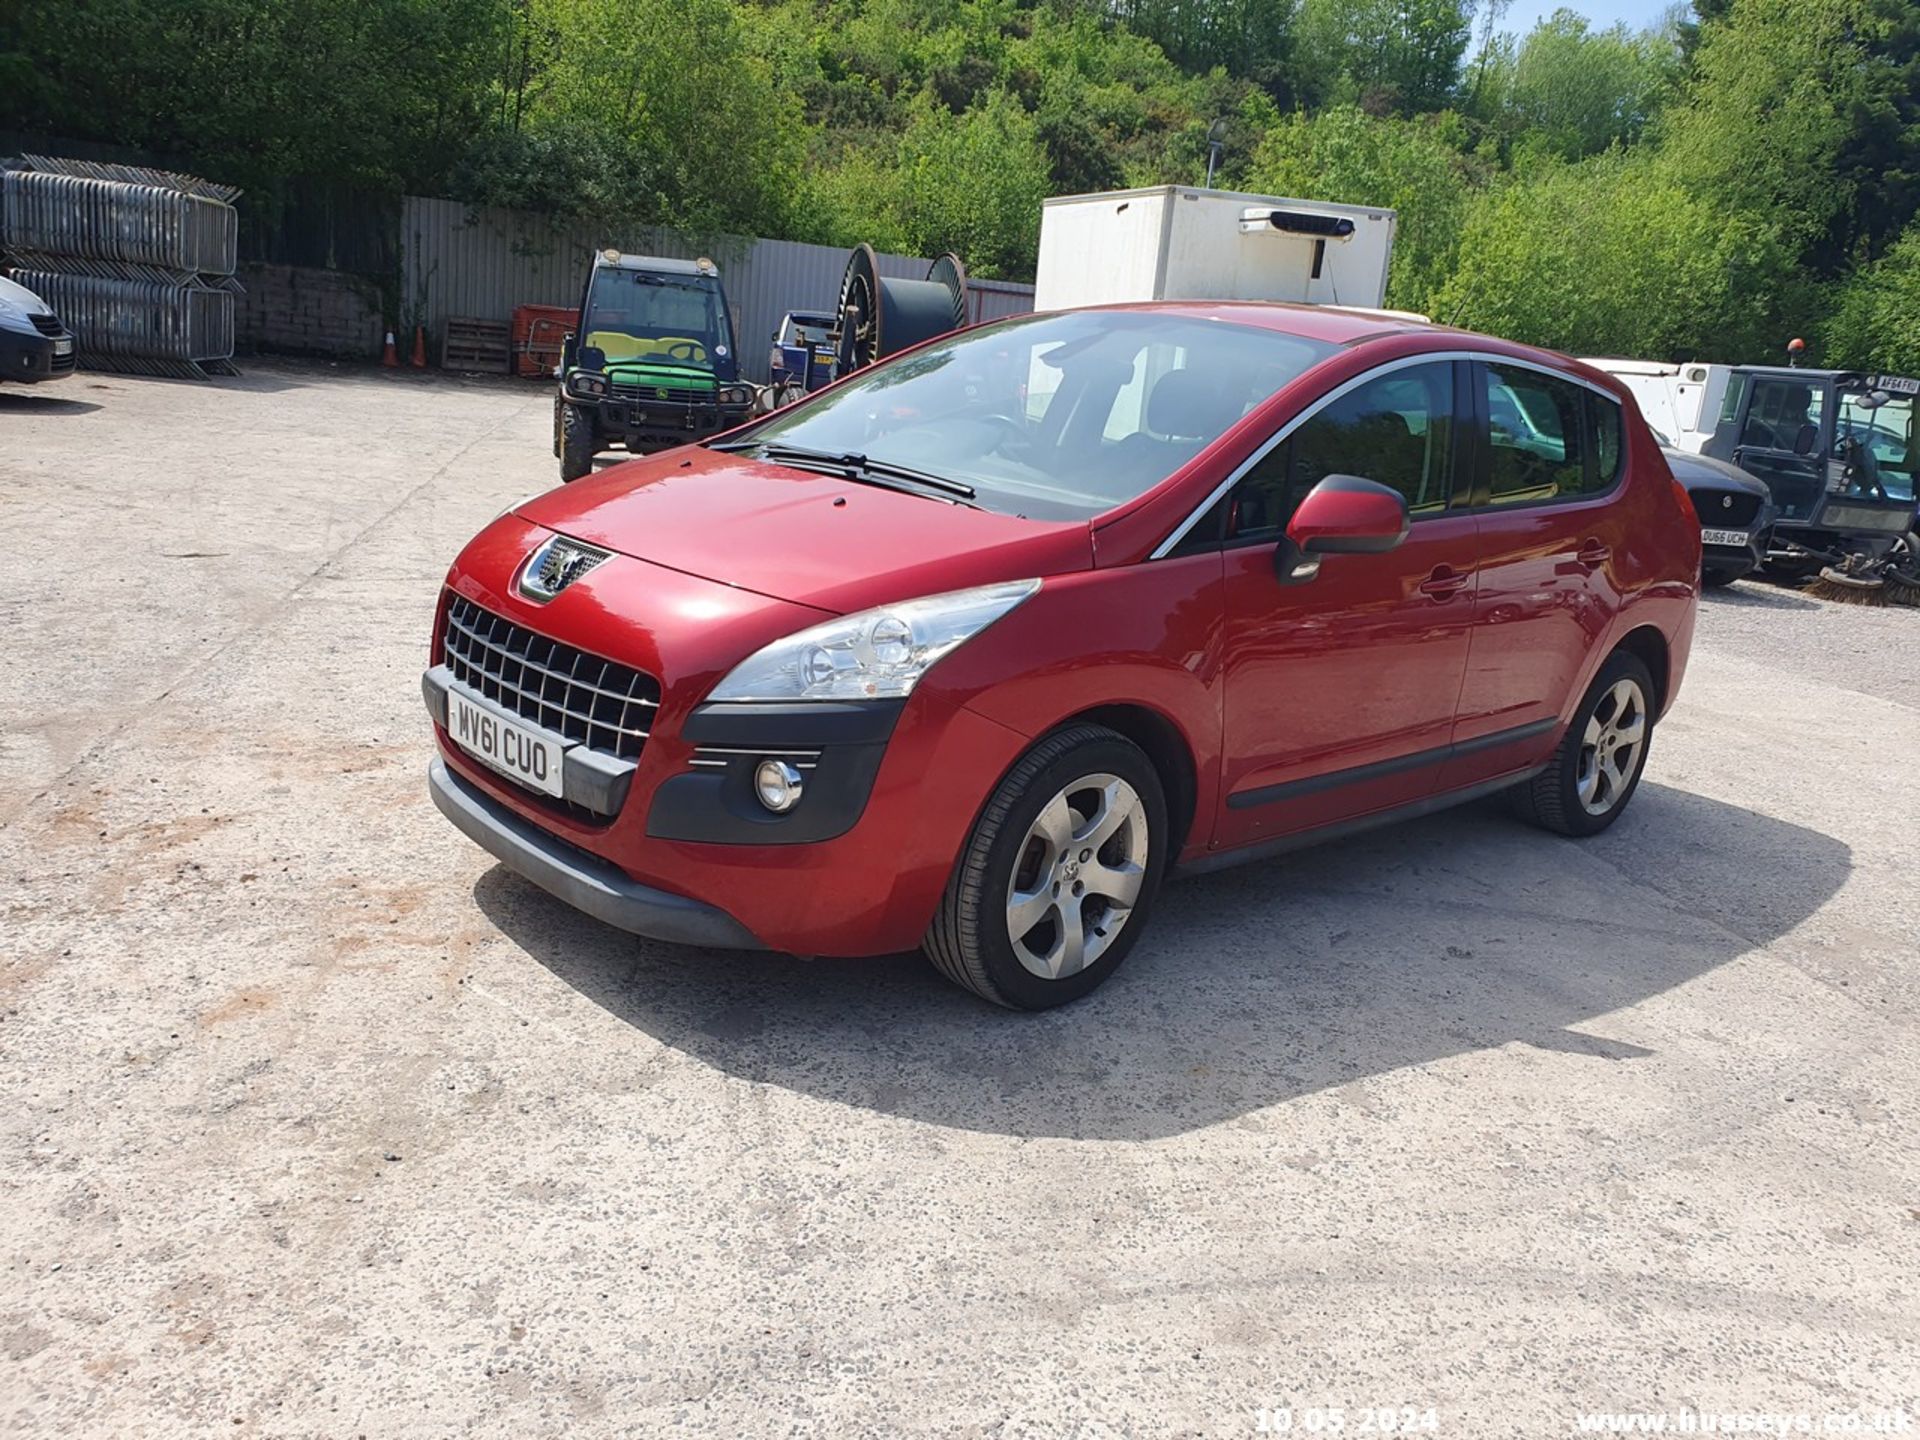 11/61 PEUGEOT 3008 SPORT E-HDI S-A - 1560cc 5dr Hatchback (Red, 89k) - Image 22 of 49